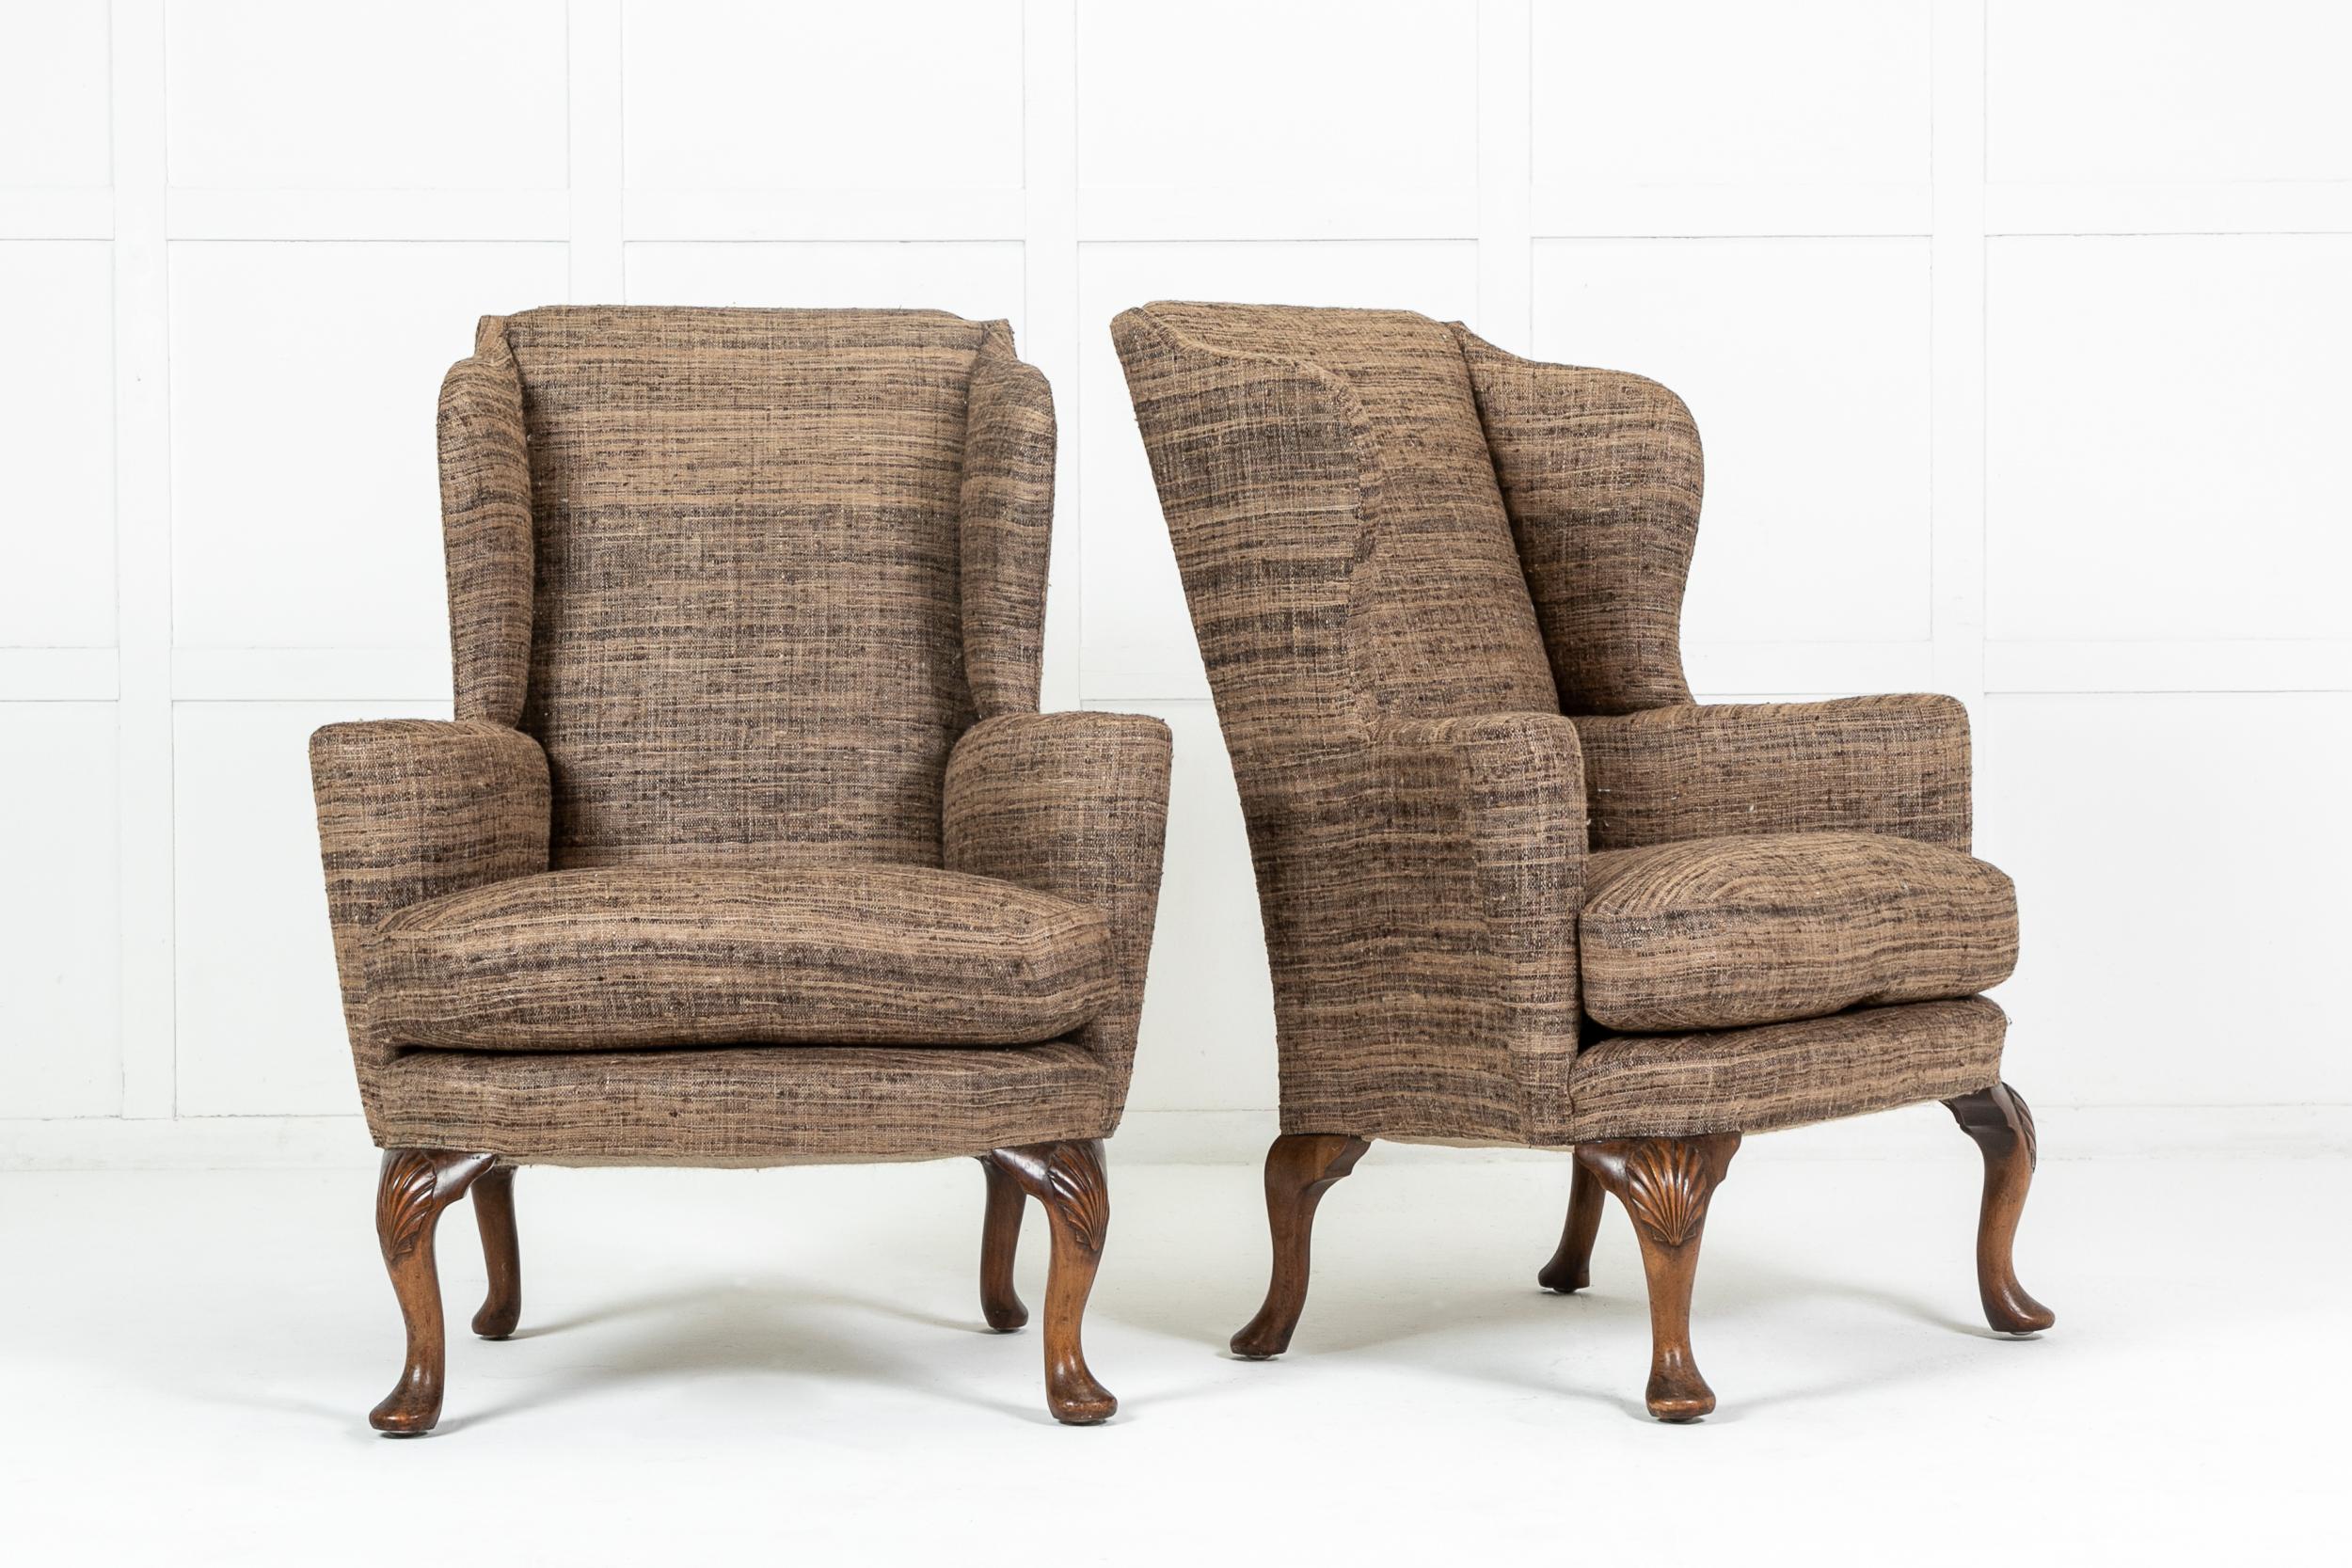 Pair of 20th Century English walnut wing armchairs. Having high backs and winged sides over enclosed, shaped and padded arms. A comfortable padded seat cushion. Standing on cabriole legs decorated with shell carvings.

A nice model in the style of